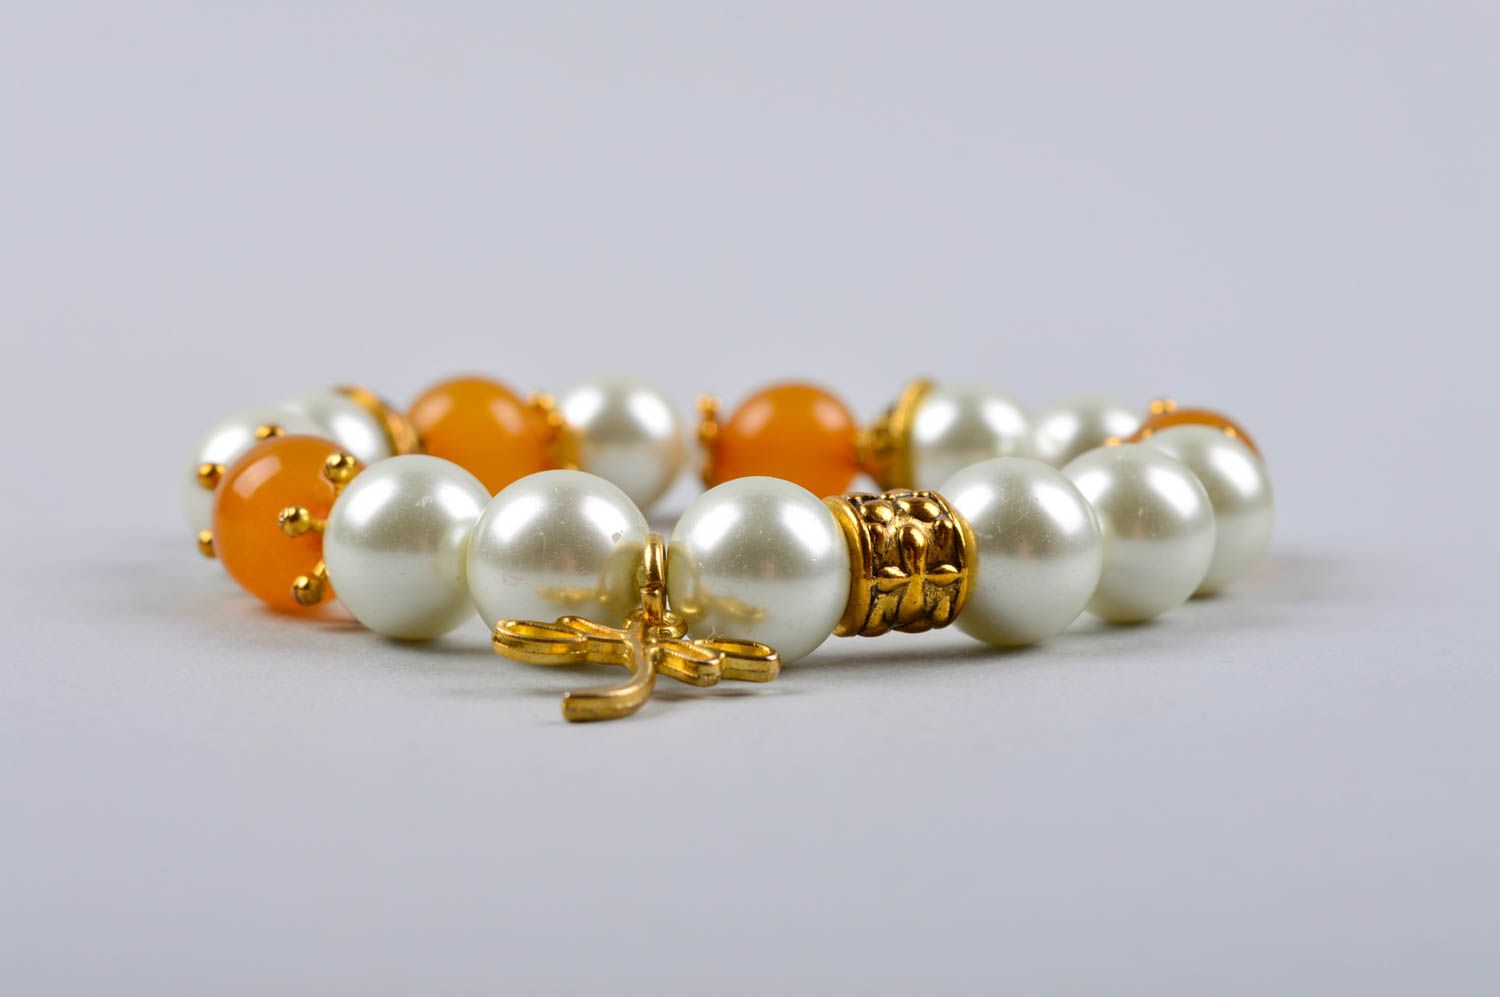 Handcrafted bracelet amber and white beads fashion designer wrist accessory photo 4